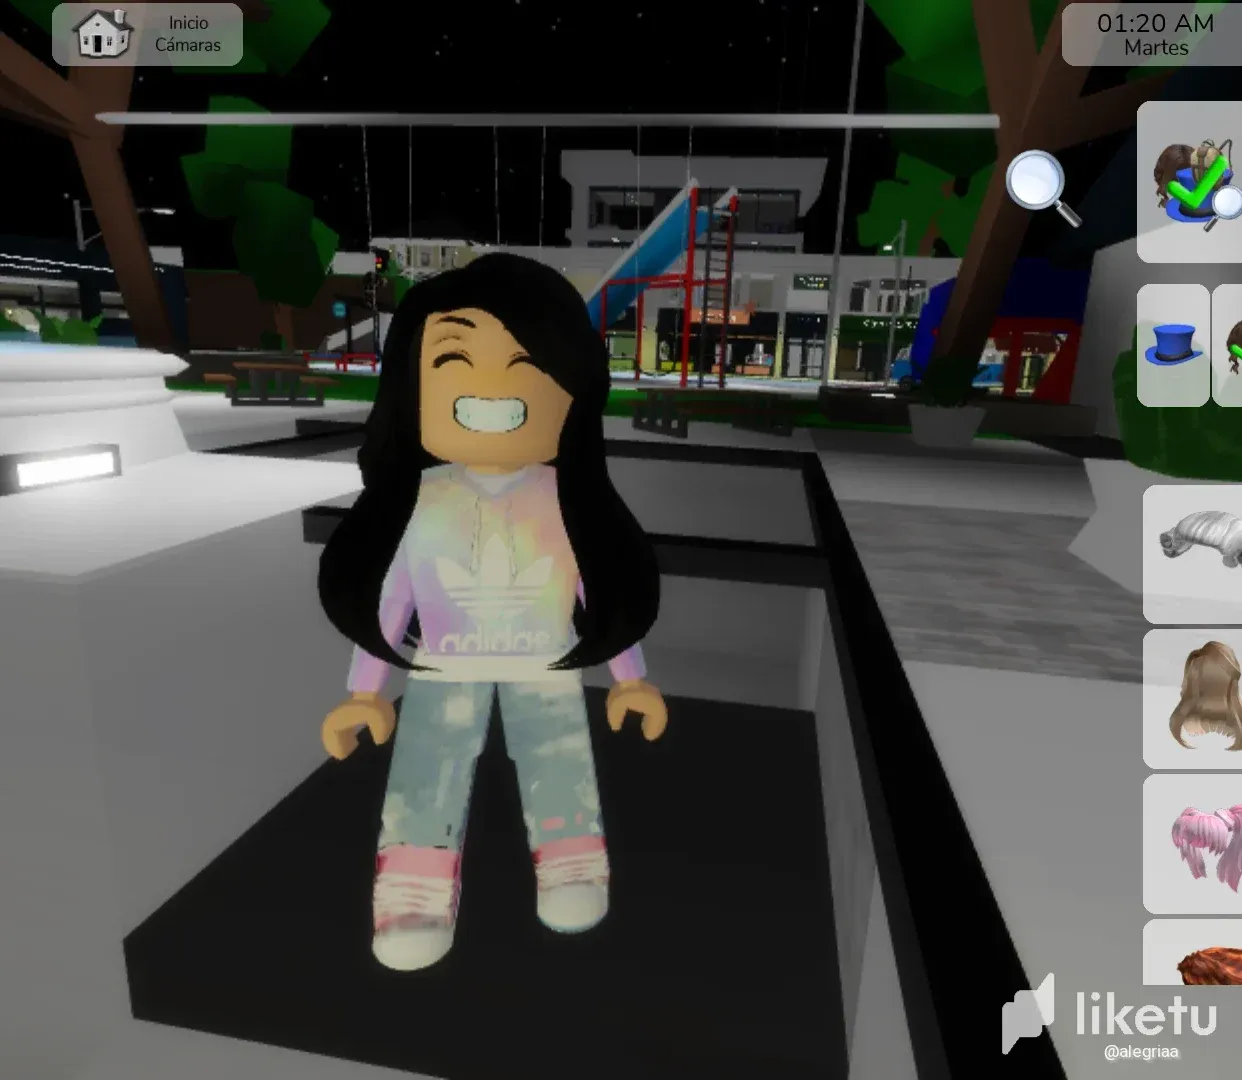 Eng-Spa] Playing roblox for the first time 🎮. — Hive